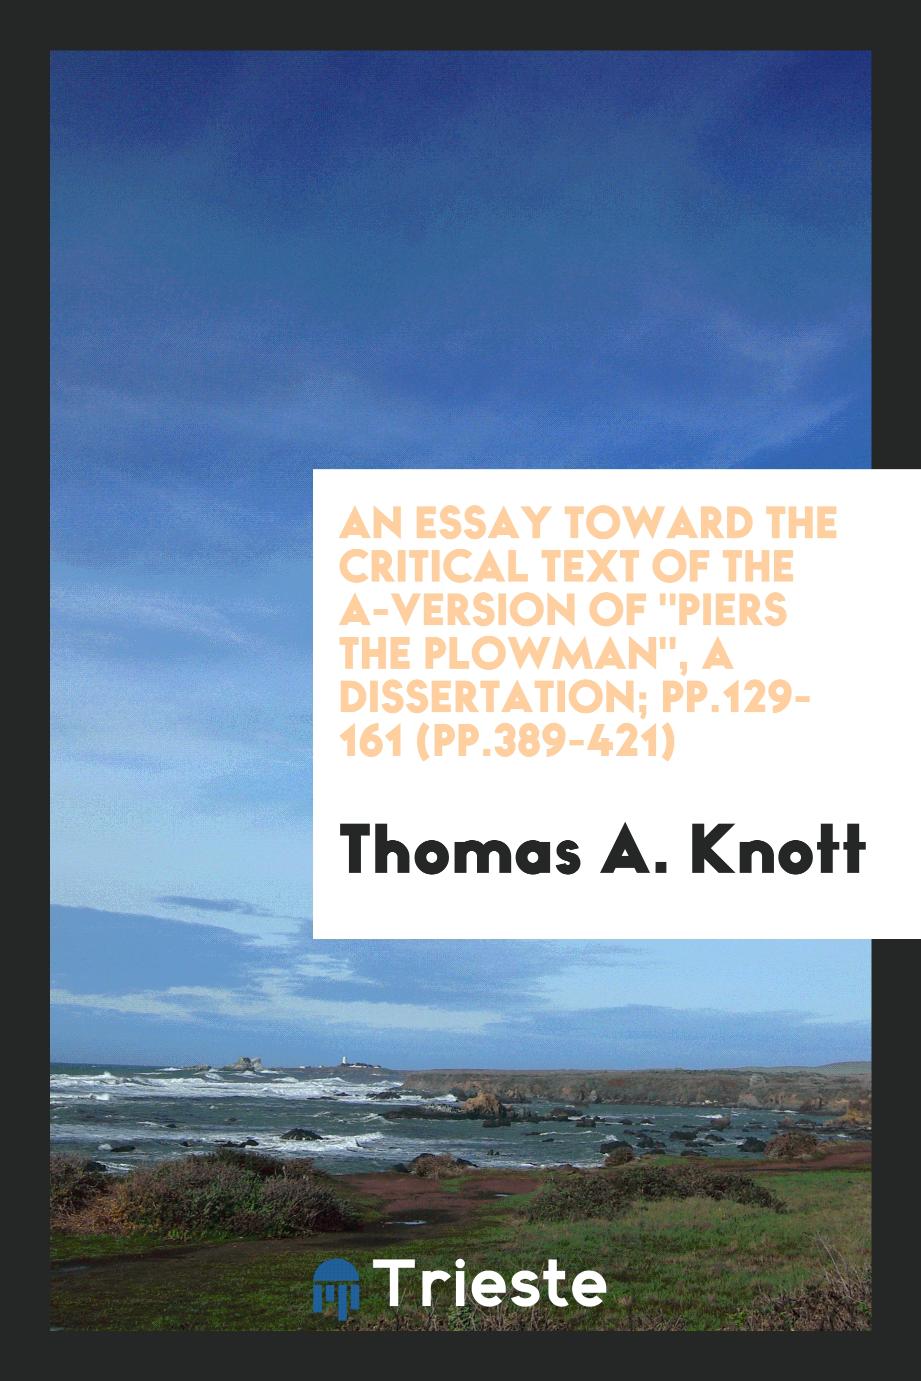 An essay toward the critical text of the A-version of "Piers the Plowman", a dissertation; pp.129-161 (pp.389-421)